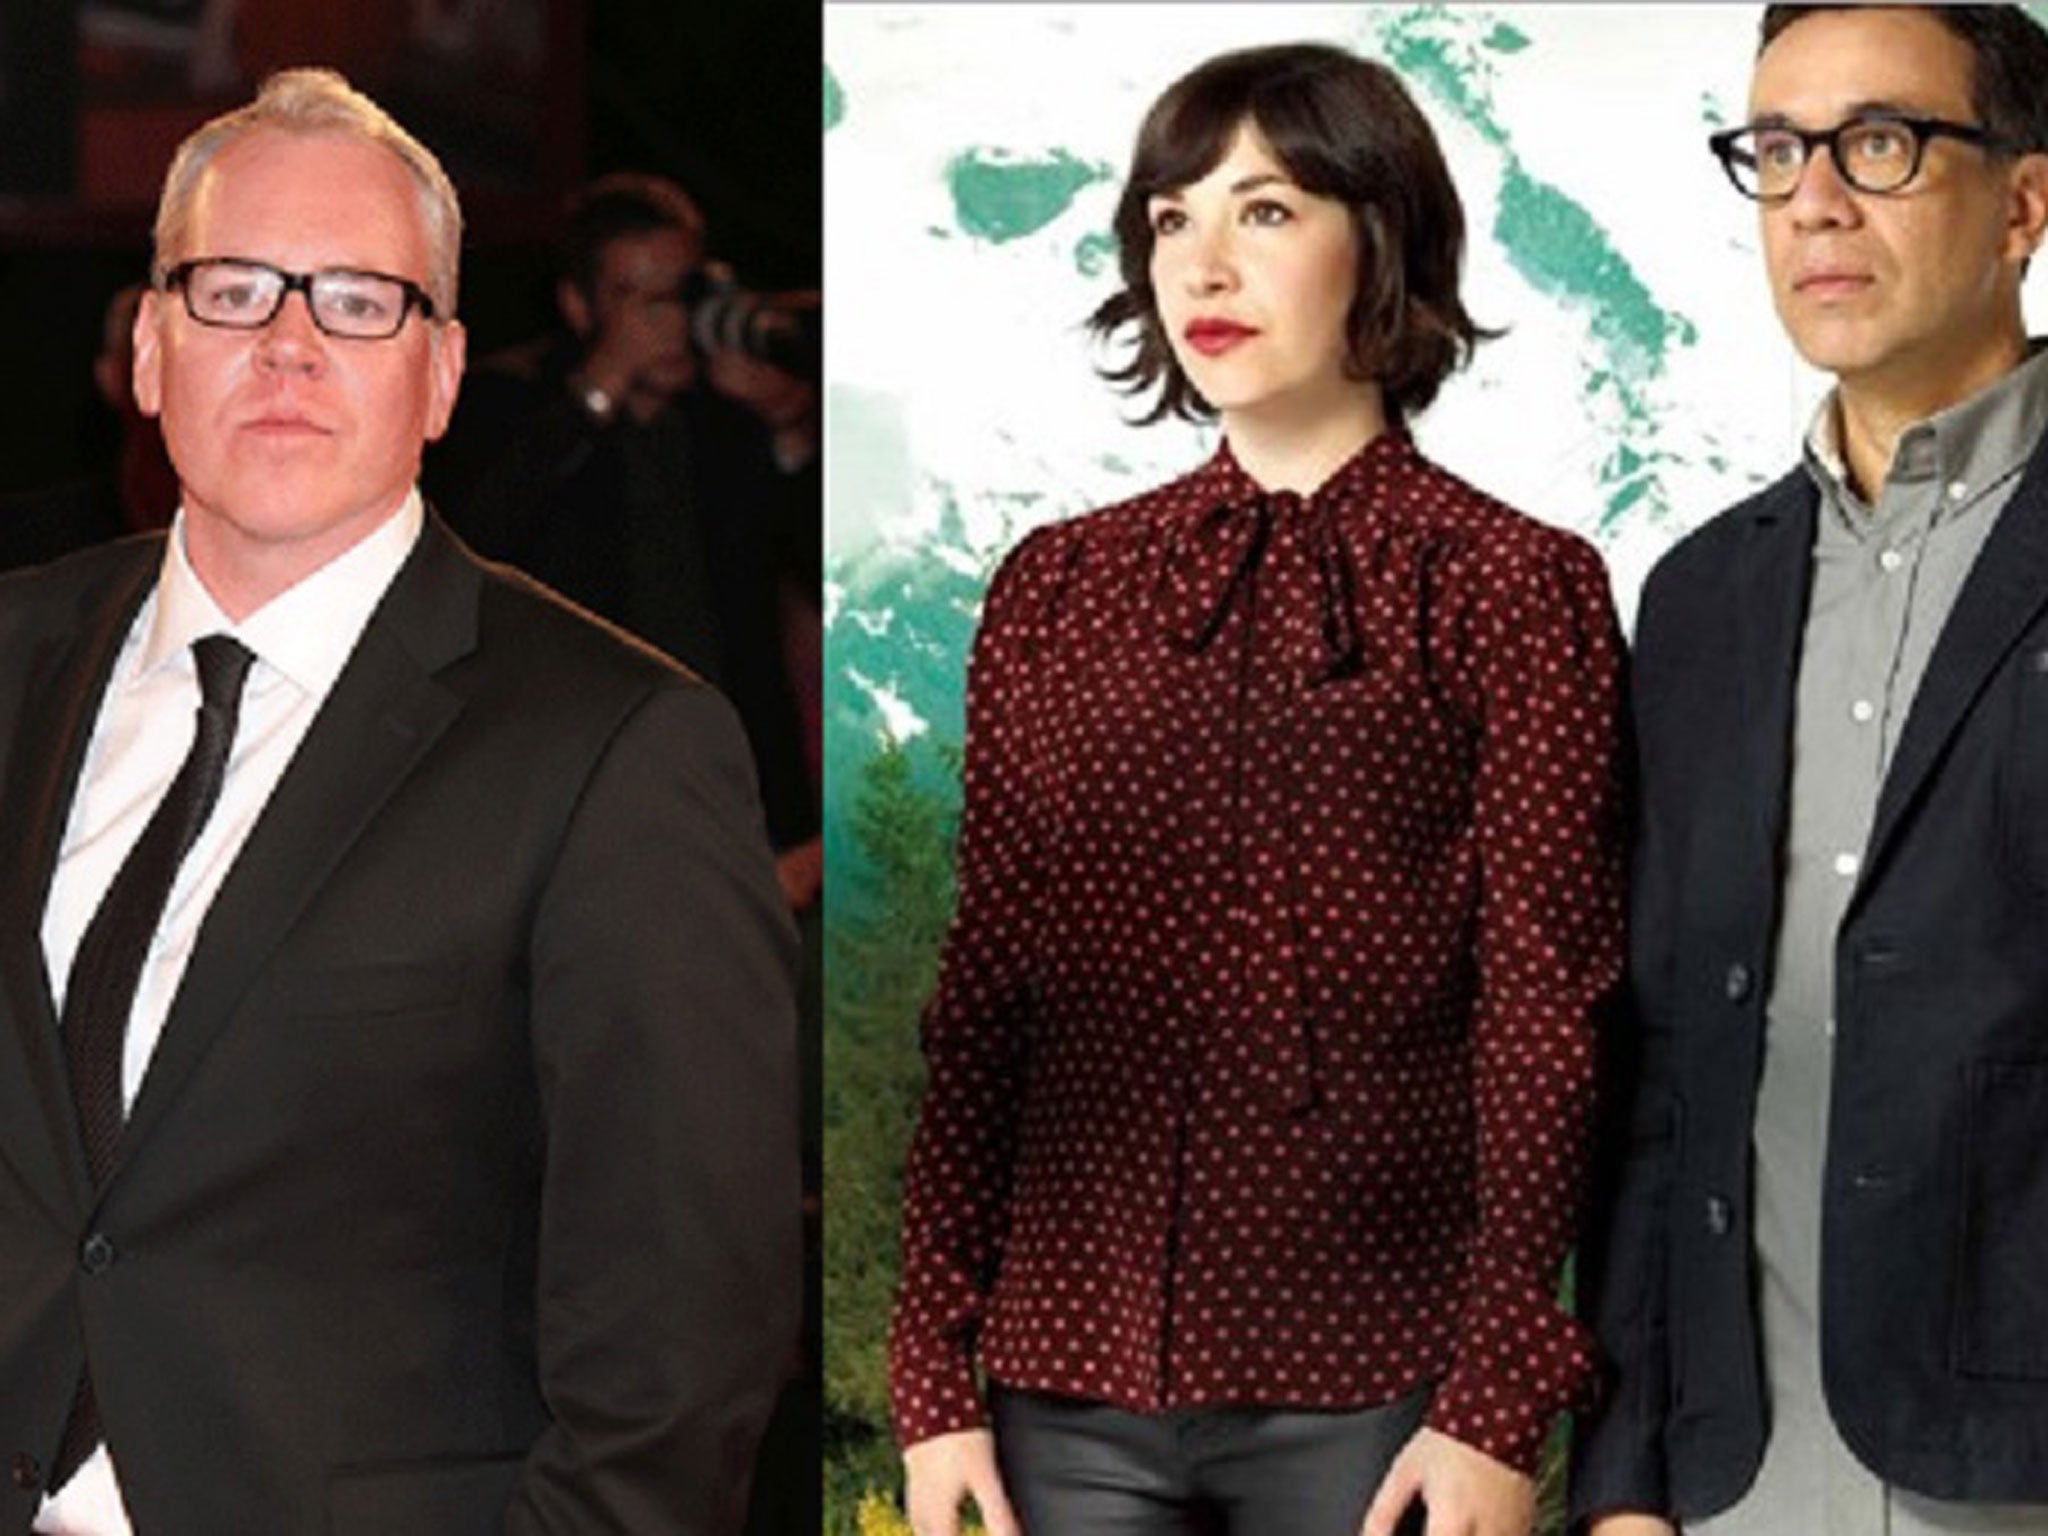 Author Bret Easton Ellis, and comedians Carrie Brownstein and Fred Armisen